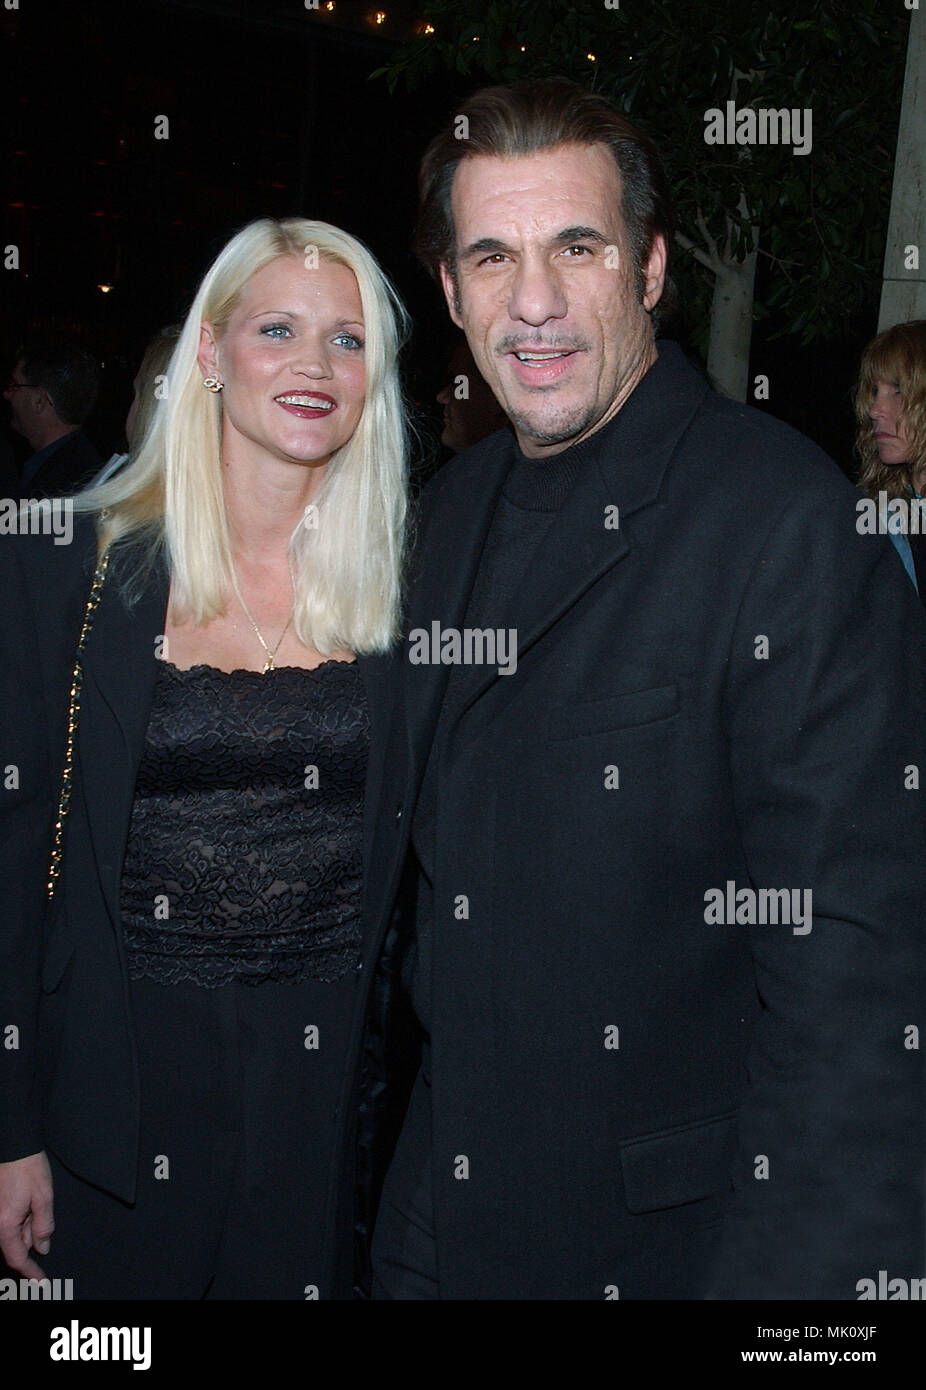 Robert Davi and wife Christine arriving at the Premiere of Hot Chick at the Century Plaza Theatre in Los Angeles. December 2, 2002.             -            DaviRobert C059hristine.JPG           -              DaviRobert C059hristine.JPGDaviRobert C059hristine  Event in Hollywood Life - California,  Red Carpet Event, Vertical, USA, Film Industry, Celebrities,  Photography, Bestof, Arts Culture and Entertainment, Topix Celebrities fashion /  from the Red Carpet-, Vertical, Best of, Hollywood Life, Event in Hollywood Life - California,  Red Carpet , USA, Film Industry, Celebrities,  movie celebr Stock Photo